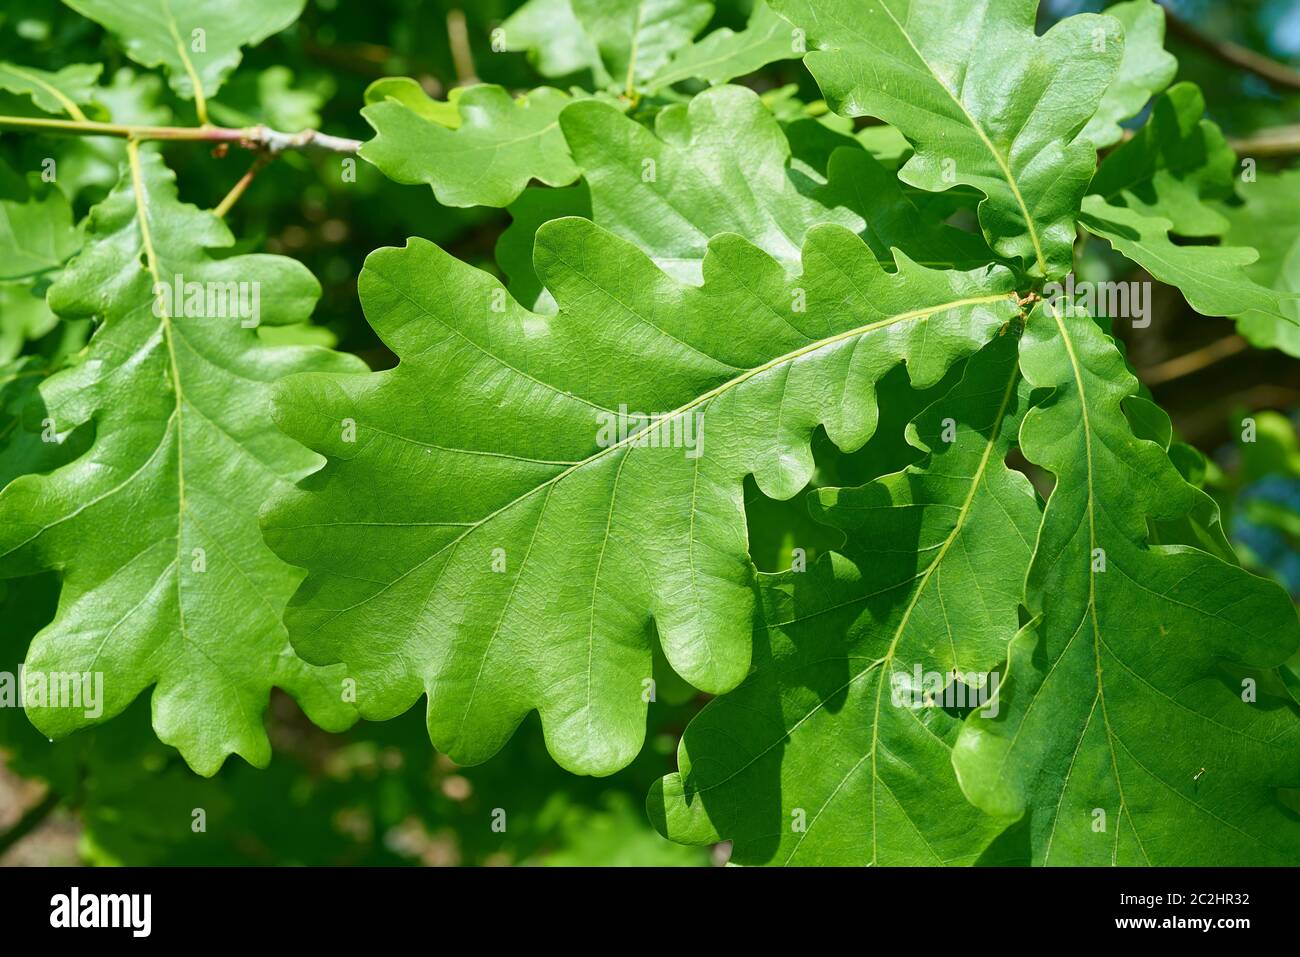 Leaves of a Common oak (Quercus robur) in spring Stock Photo